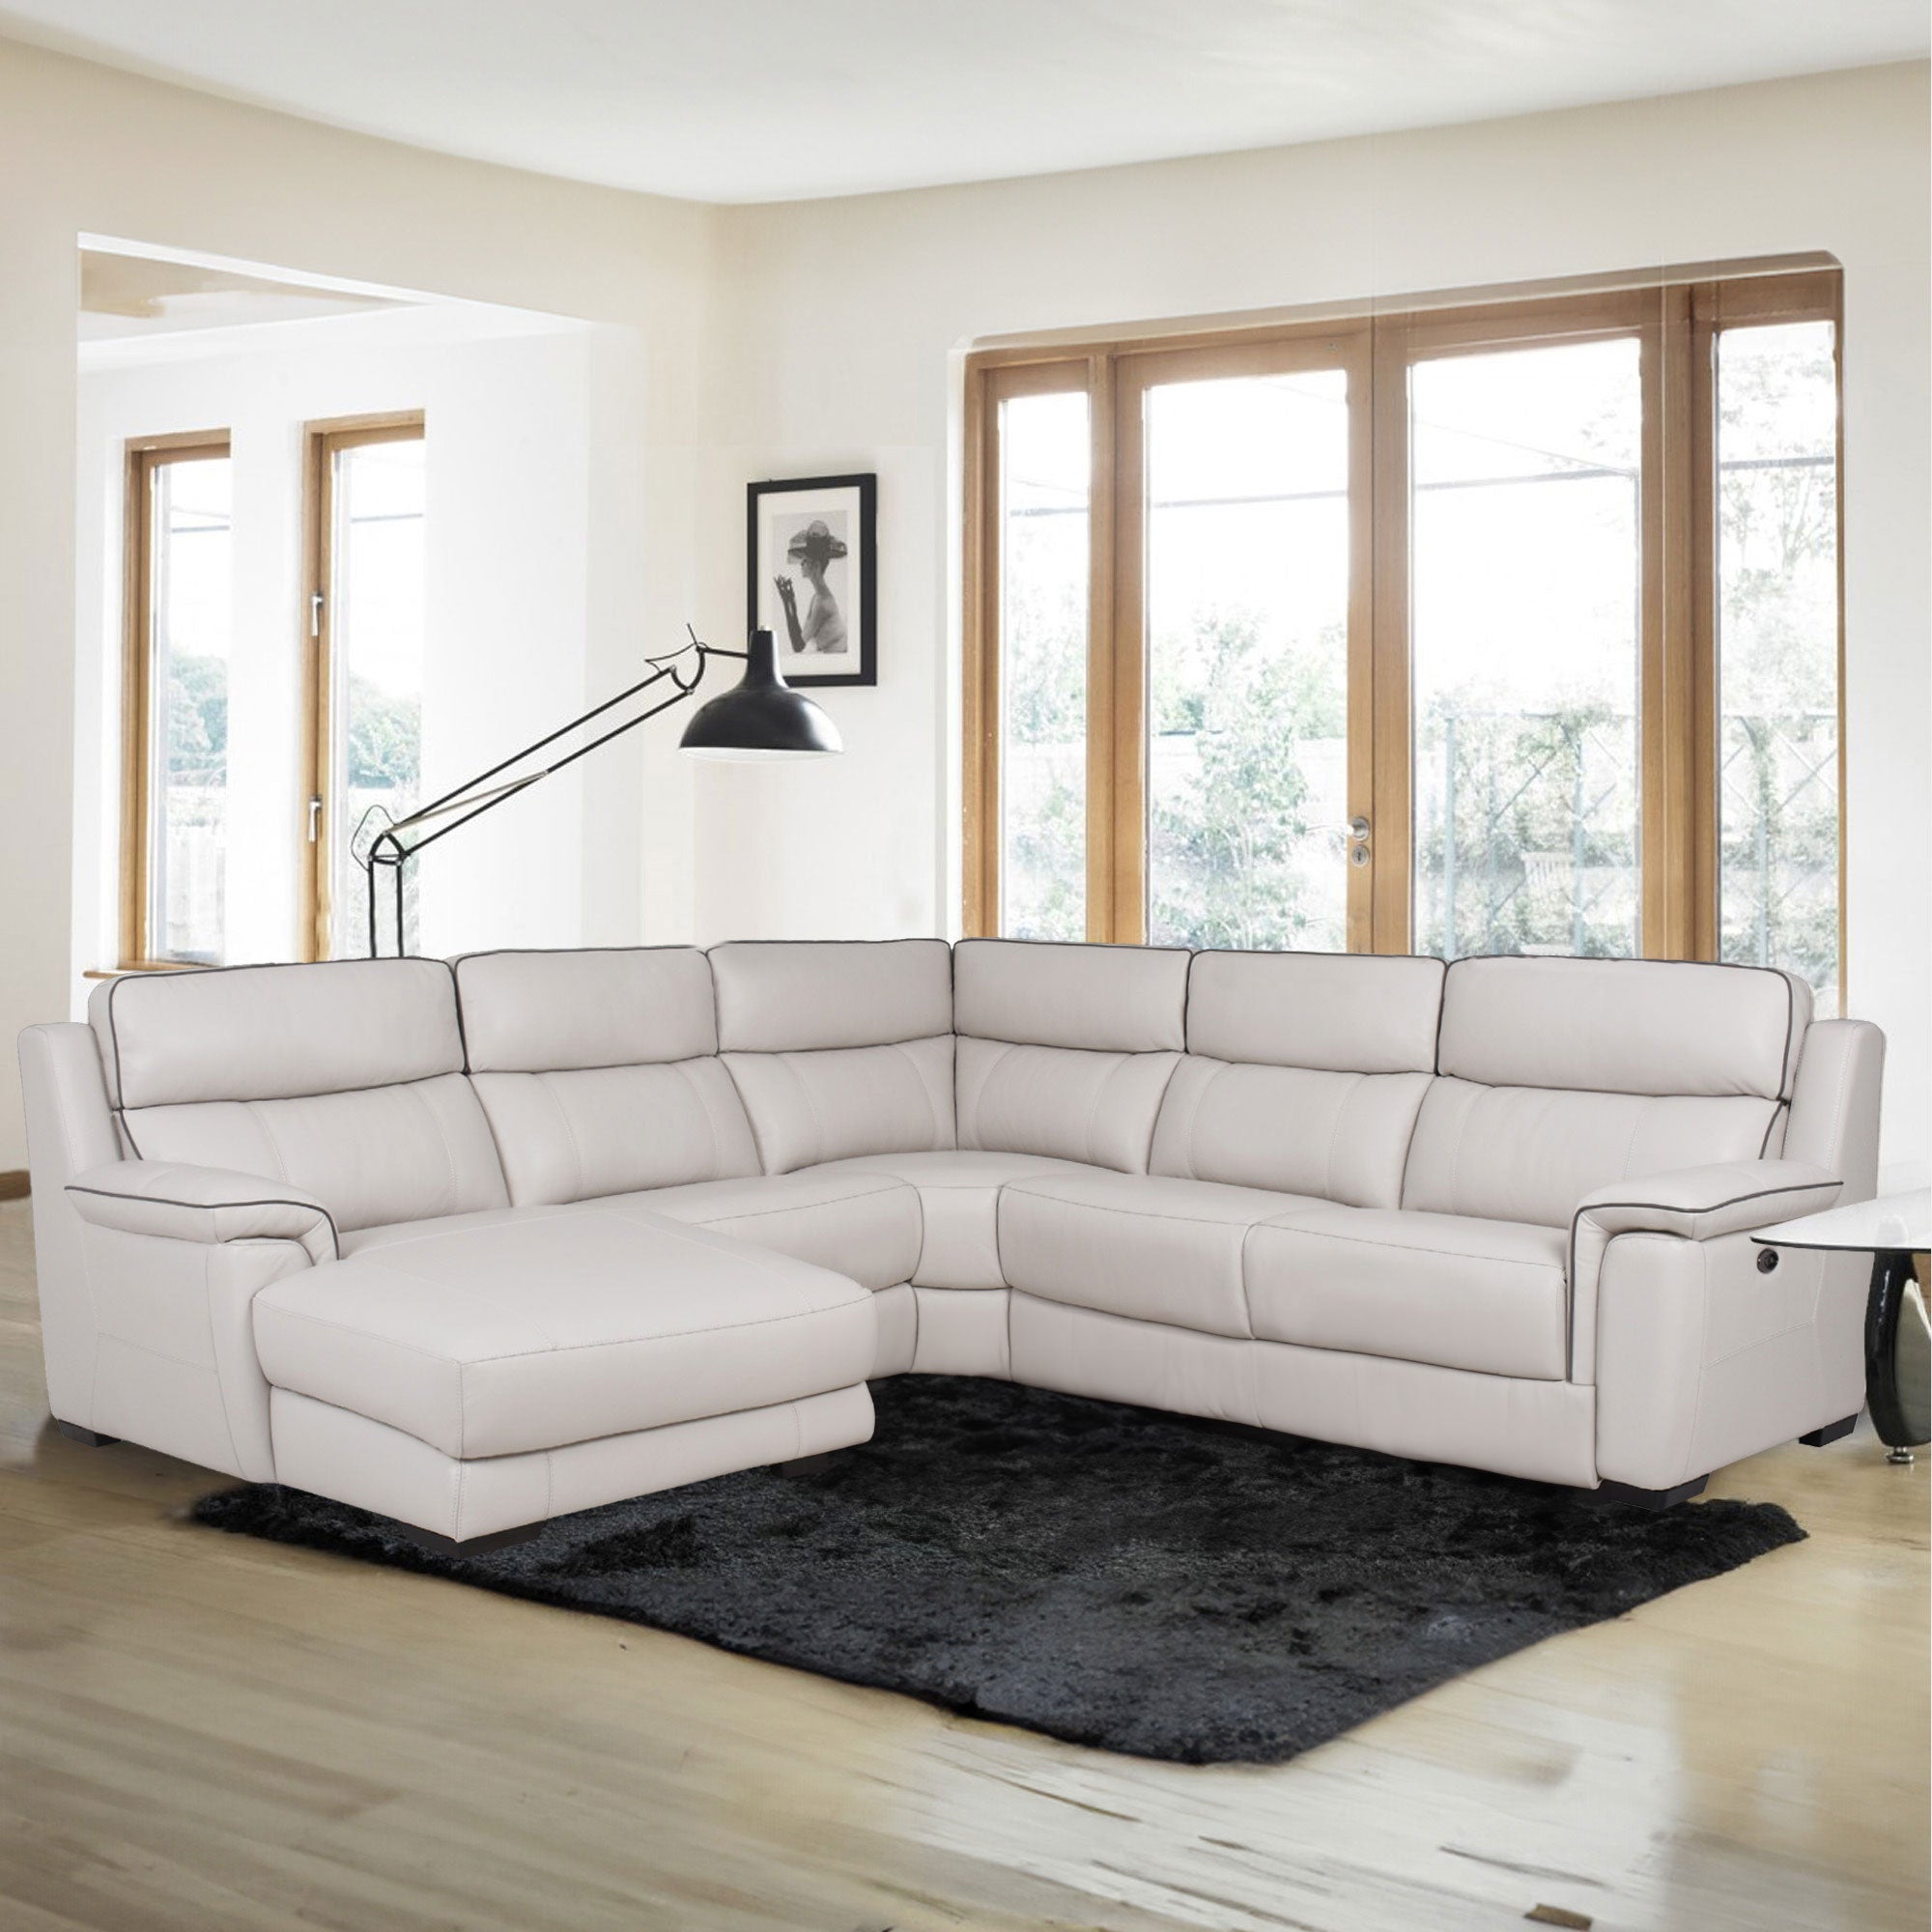 RHF Chaise Corner Group In Cat 25 Full Leather  In Cat 25 Full Leather